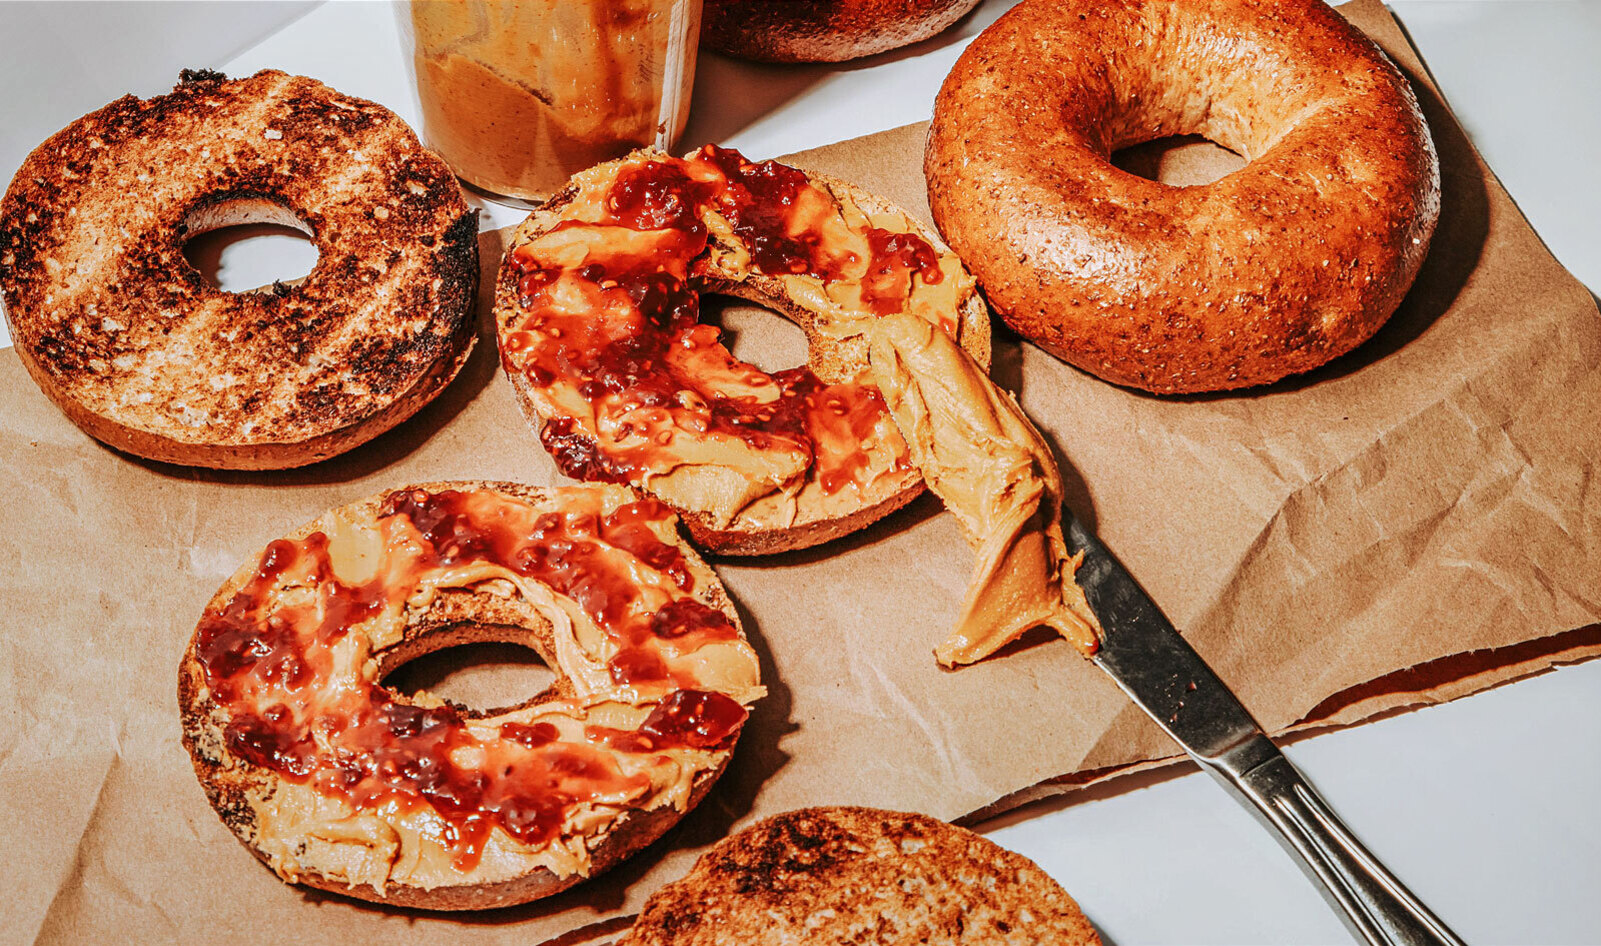 Want to Know How to Find the Best Bagels? We've Got You&nbsp;